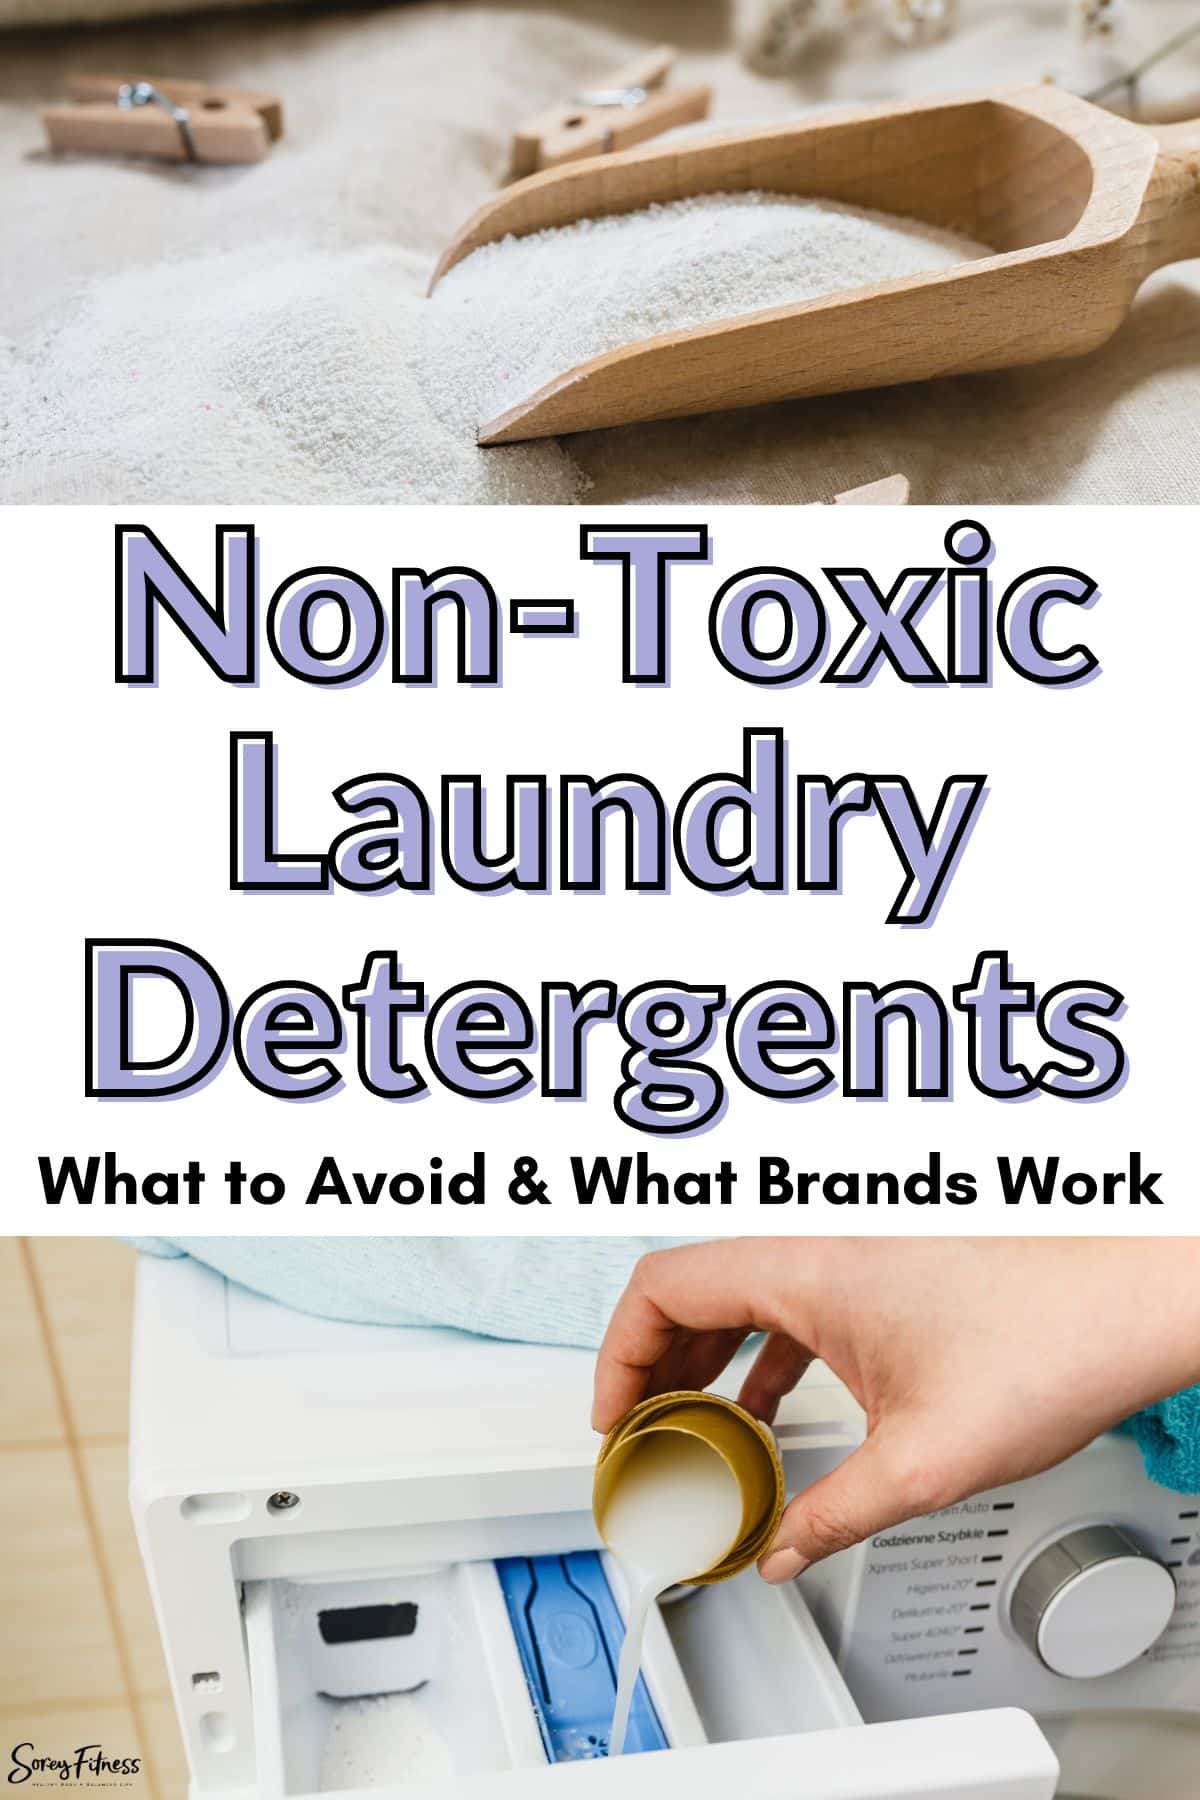 collage of powder and liquid detergent - text overlay says non-toxic laundry detergents - what to avoid and what brands work